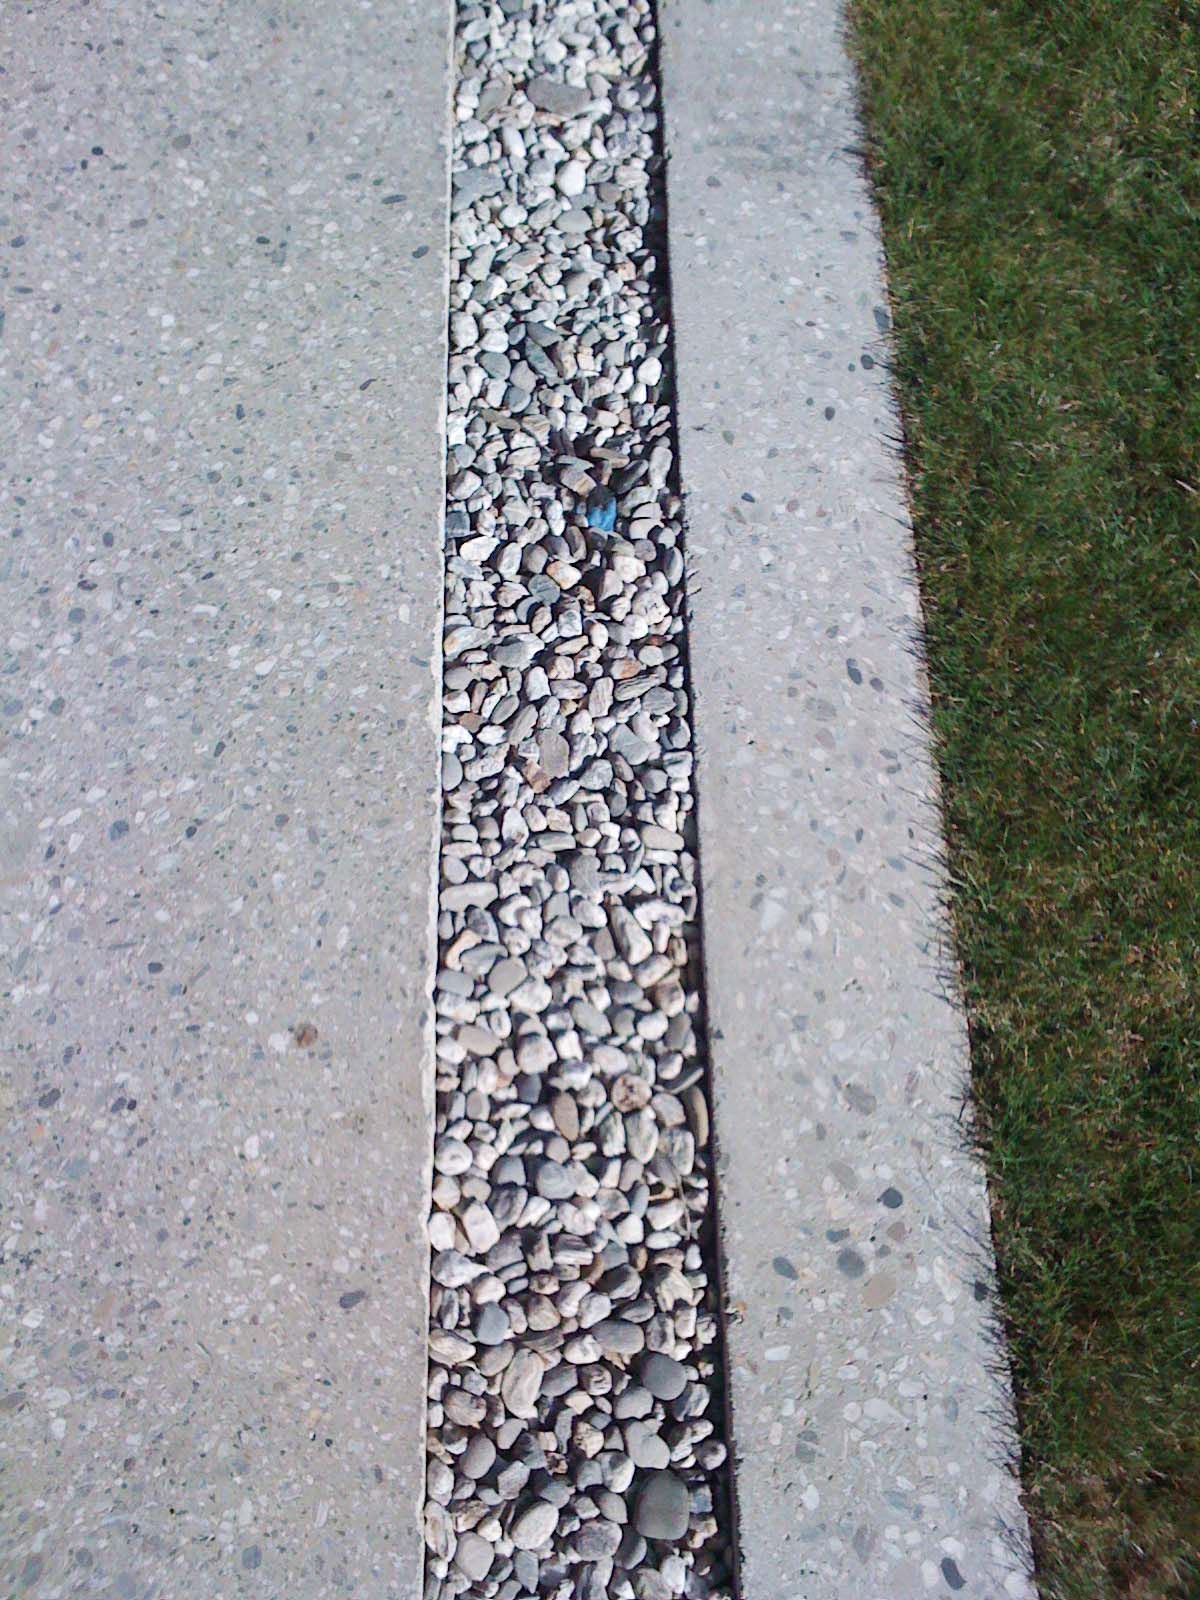 Dallage Jardin Génial Pebble Drain with Right Grading Great for Patio or